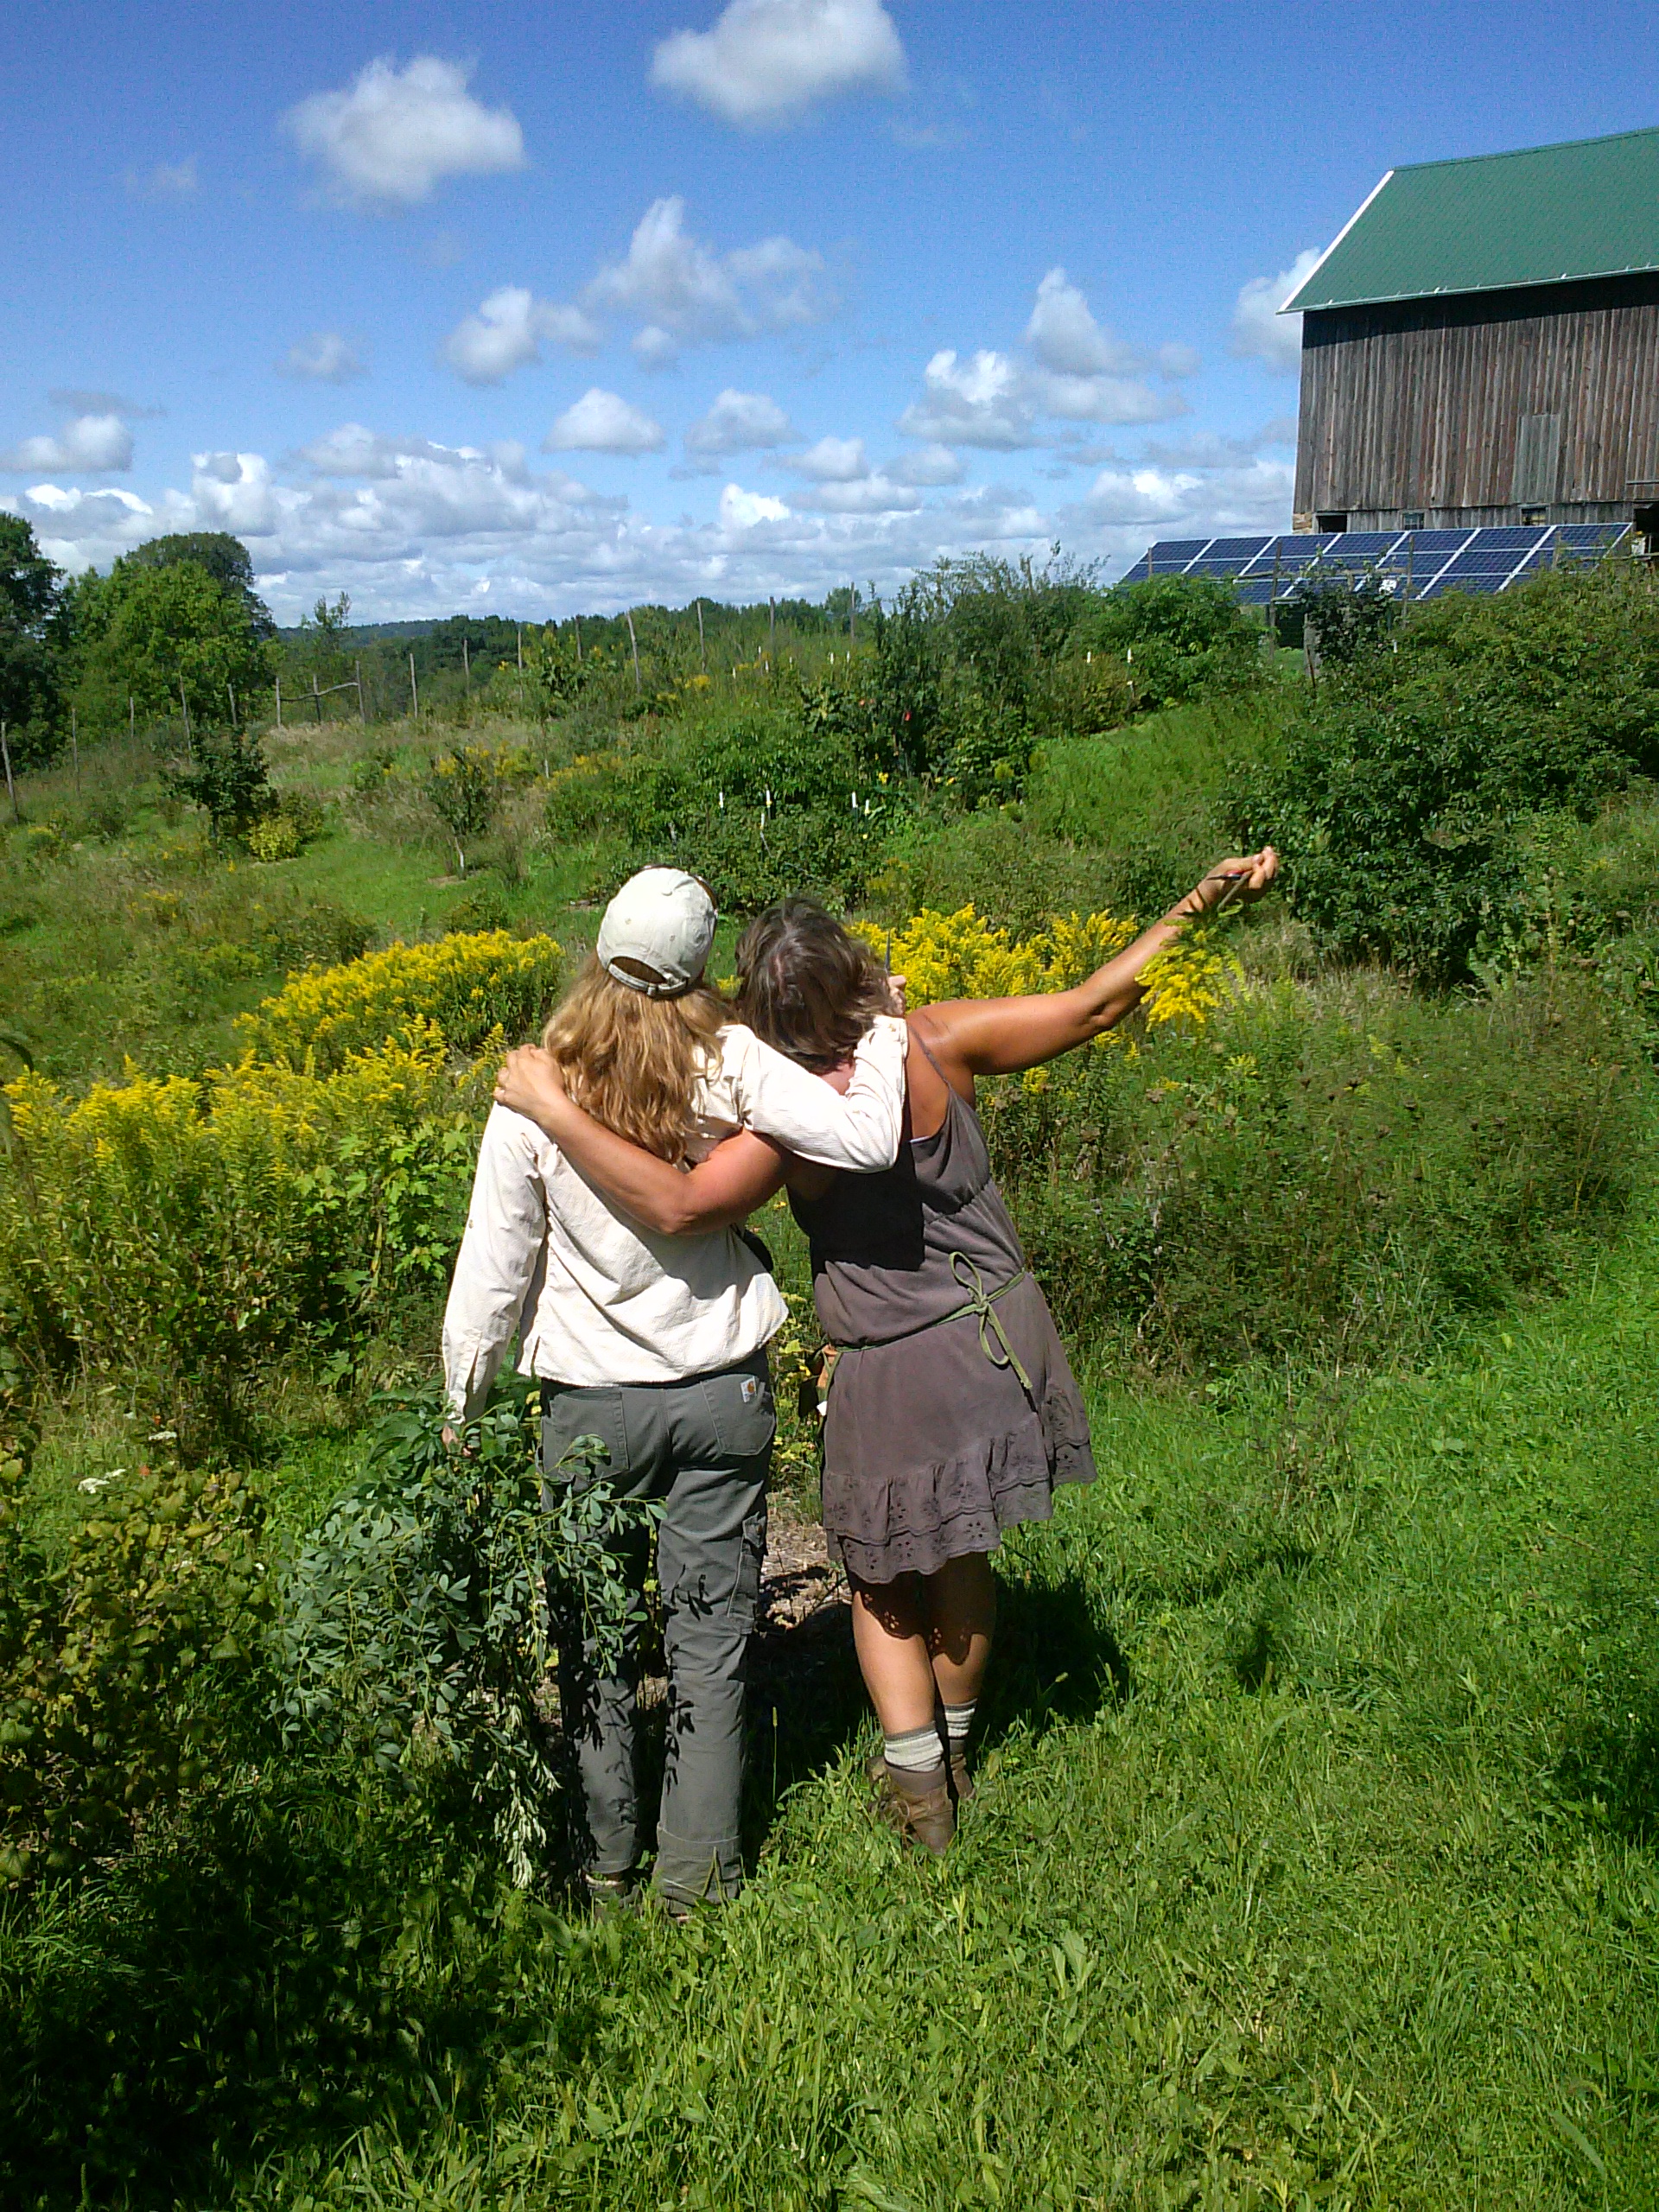 sharing the farm flower viewpoints with Kelly.jpg